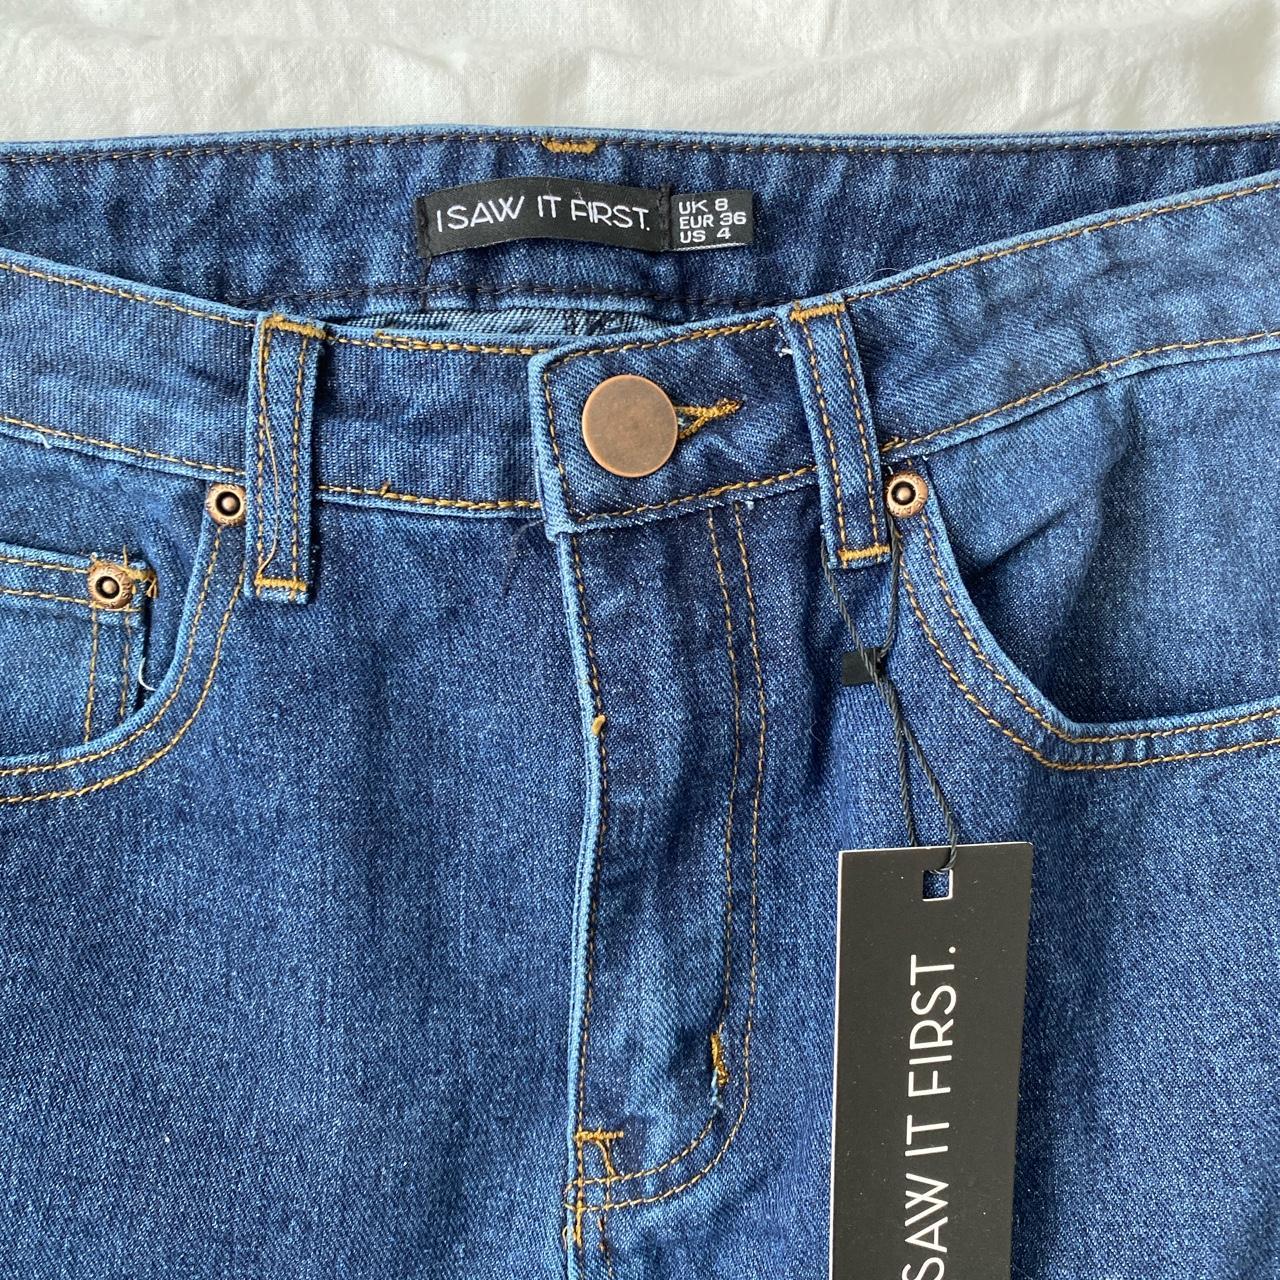 I Saw It First Women's Blue and Navy Jeans (3)